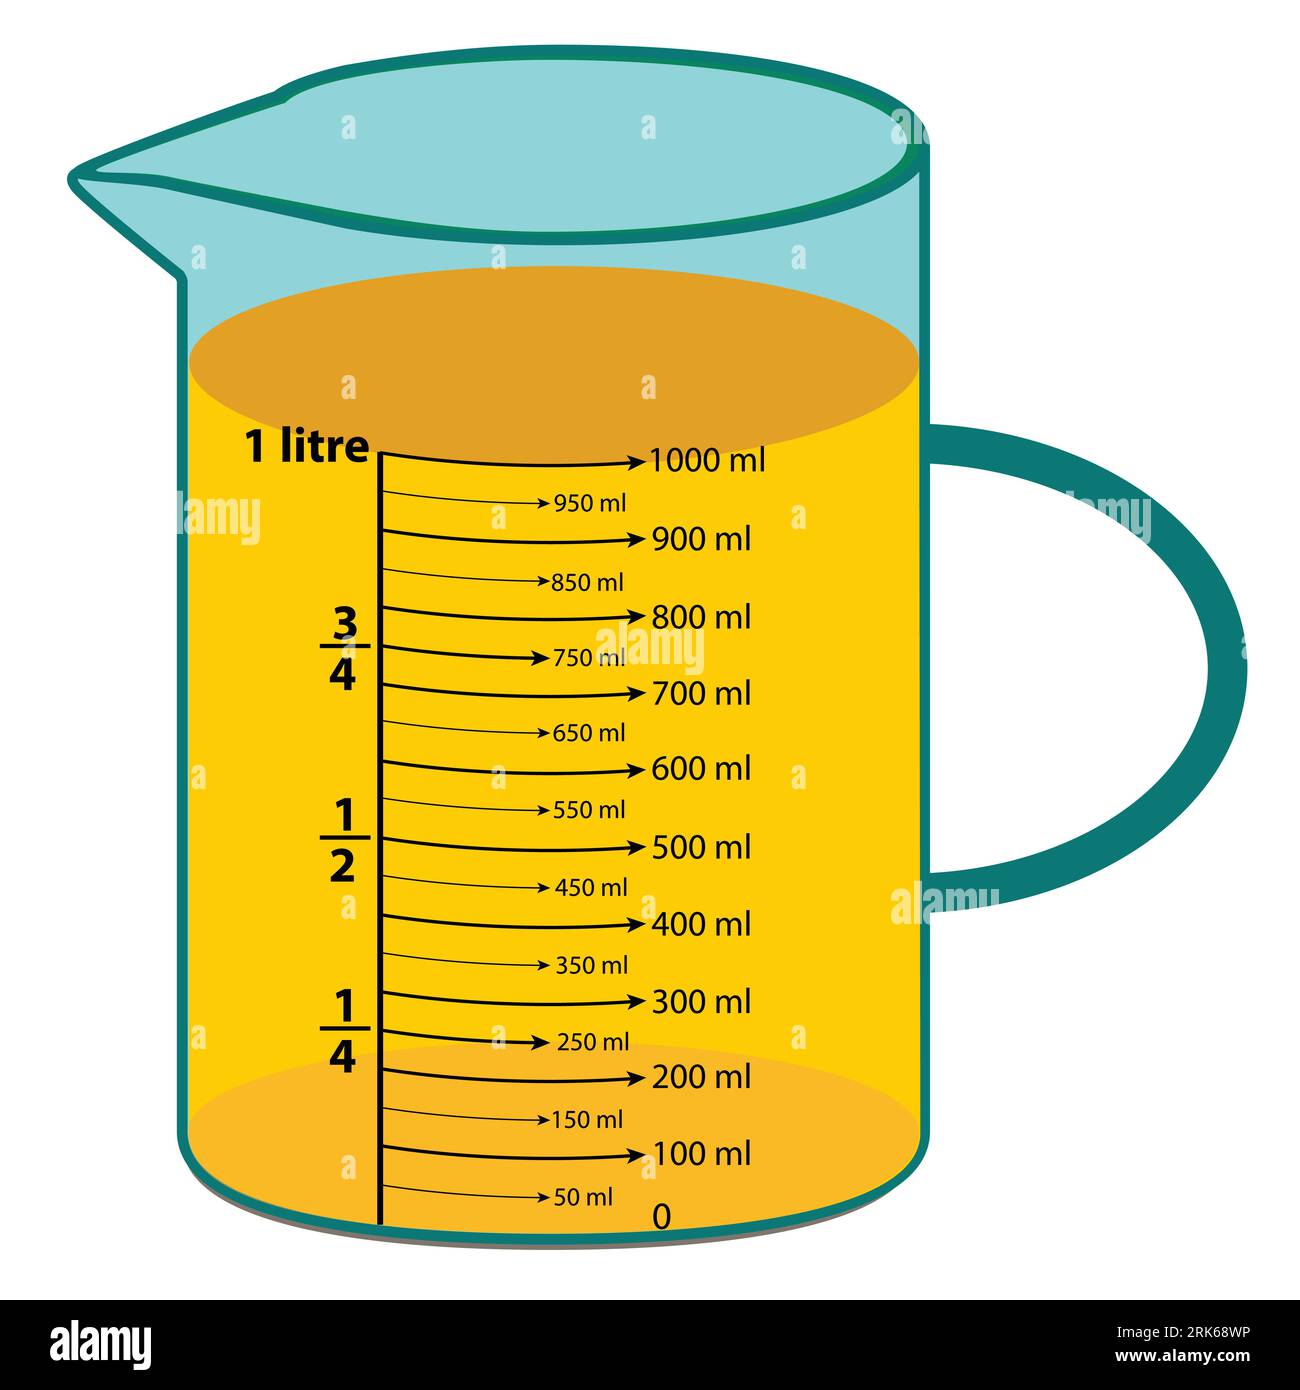 https://c8.alamy.com/comp/2RK68WP/scale-measuring-jug-1000ml-with-measuring-scale-beaker-for-chemical-experiments-in-the-laboratory-vector-illustration-2RK68WP.jpg